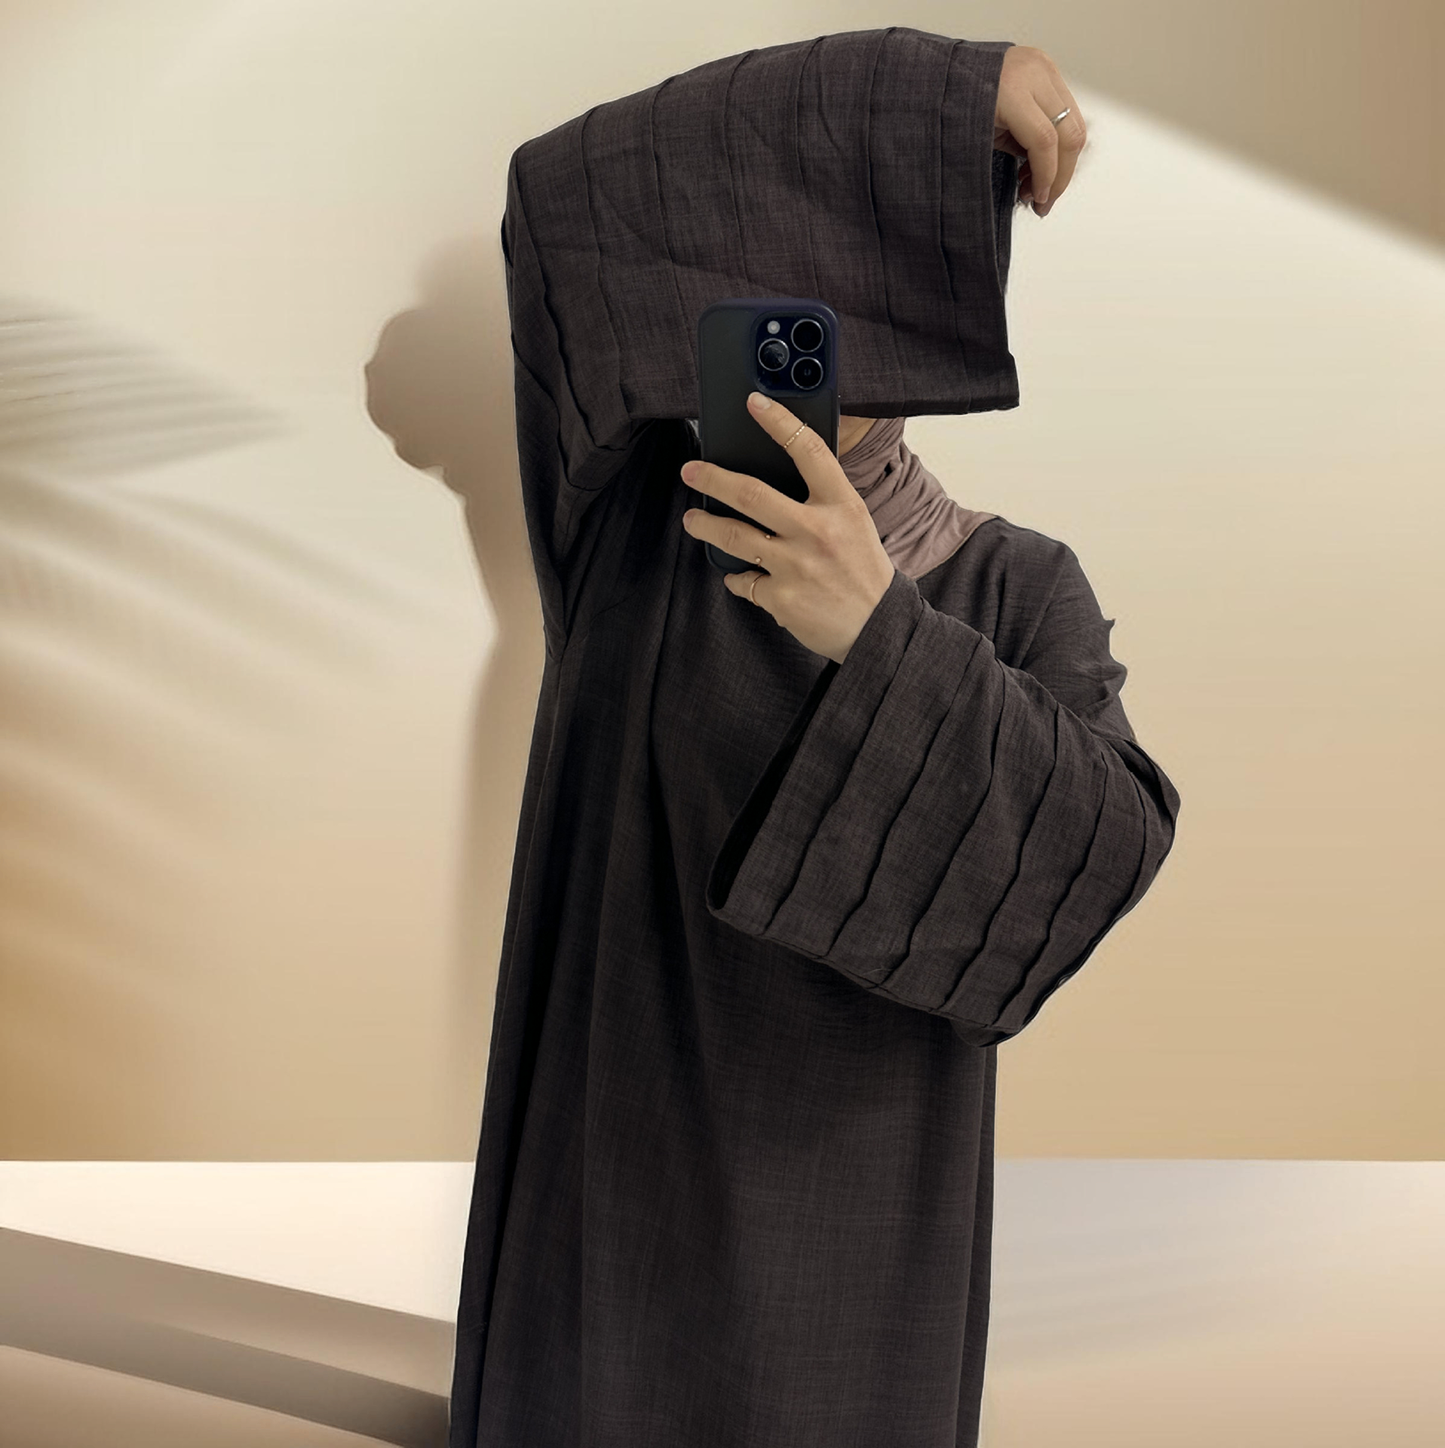 Everyday Comfort Abaya - Try Modest Limited 